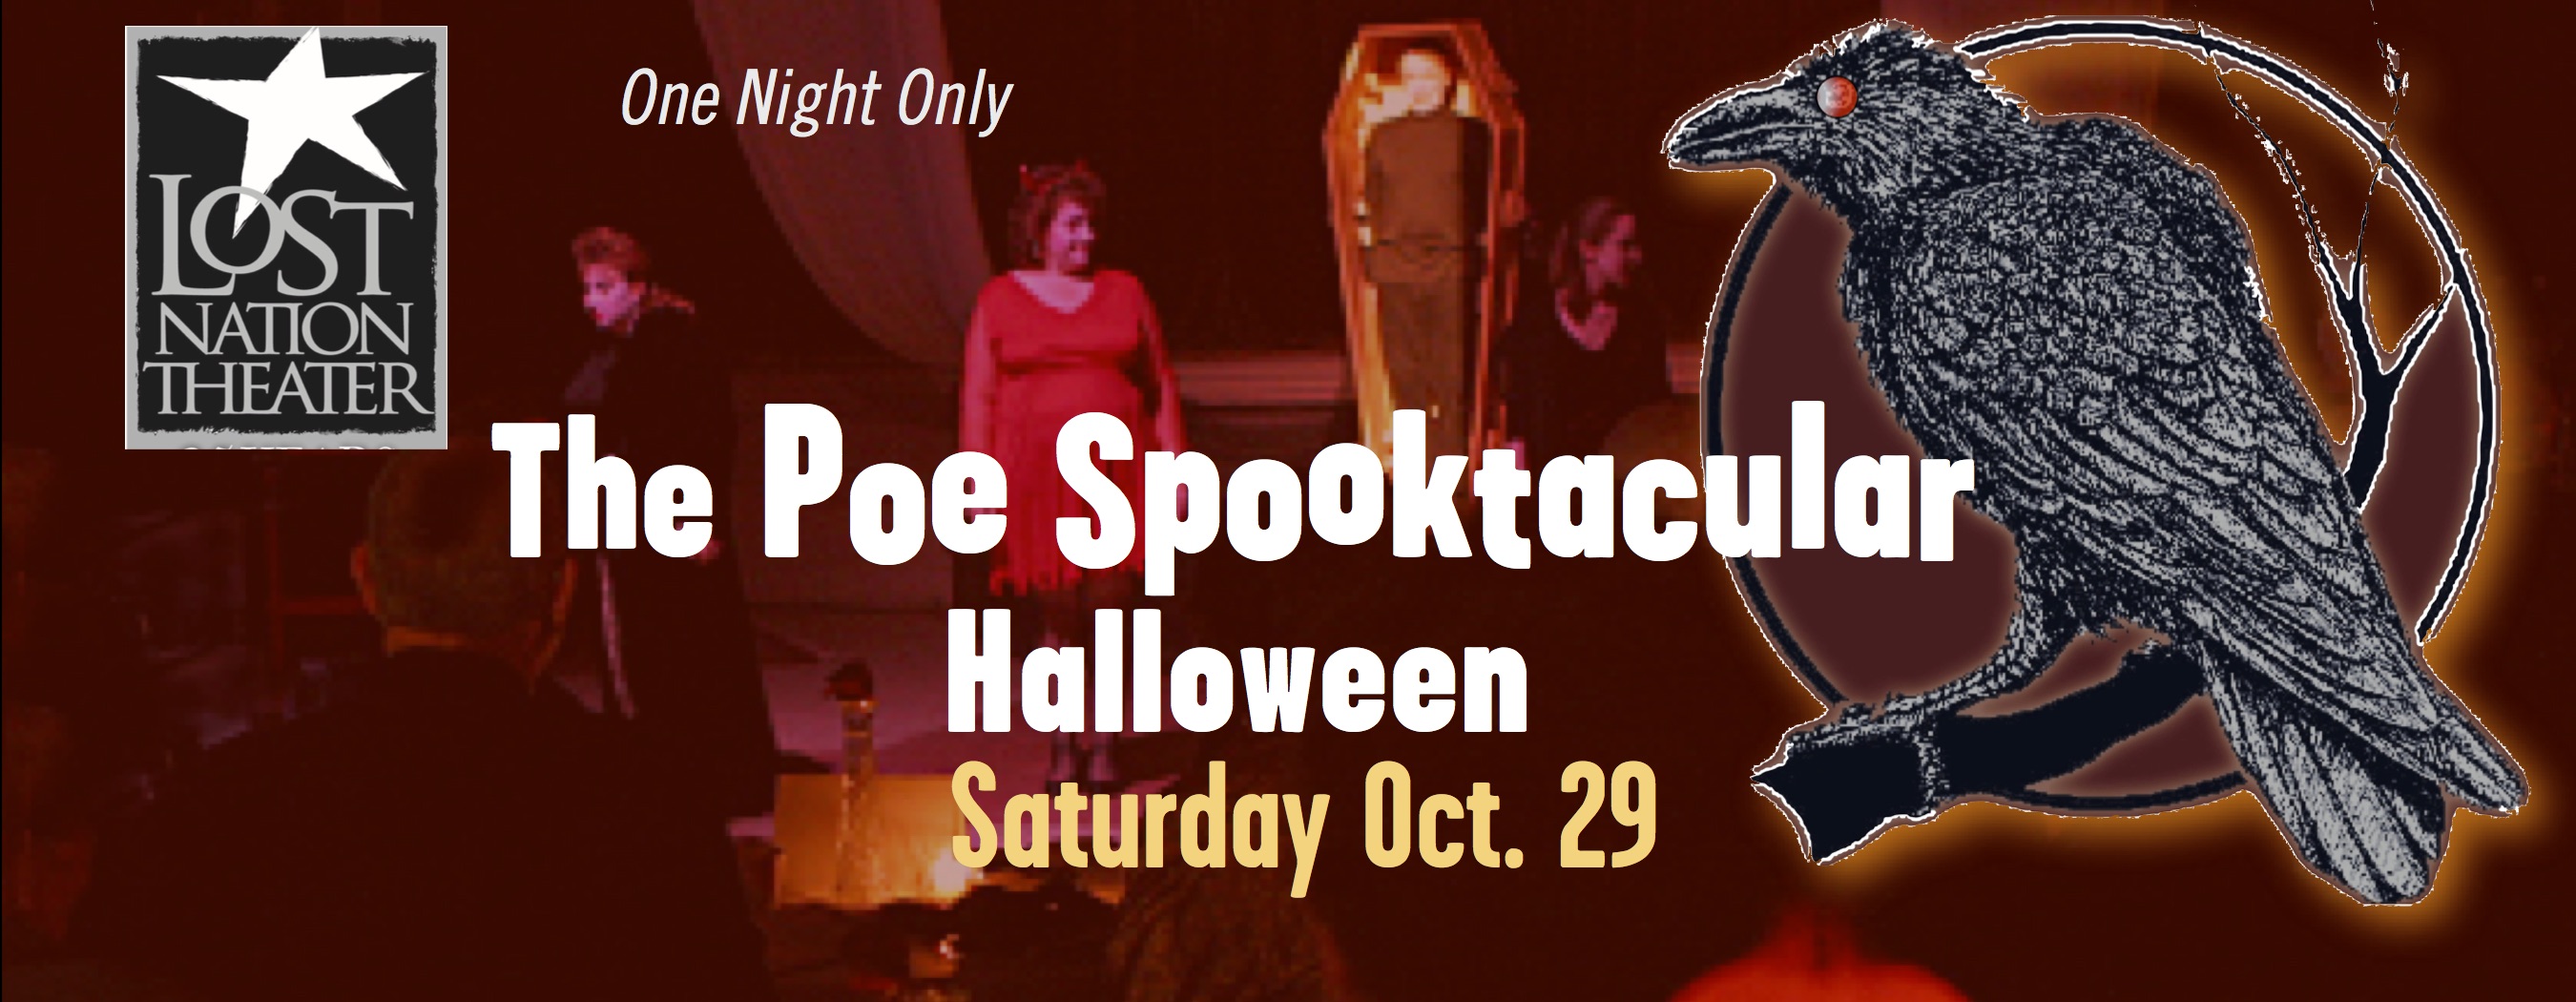 graphic with scene shot, raven image & lnt logo for Poe Spootacular 2016